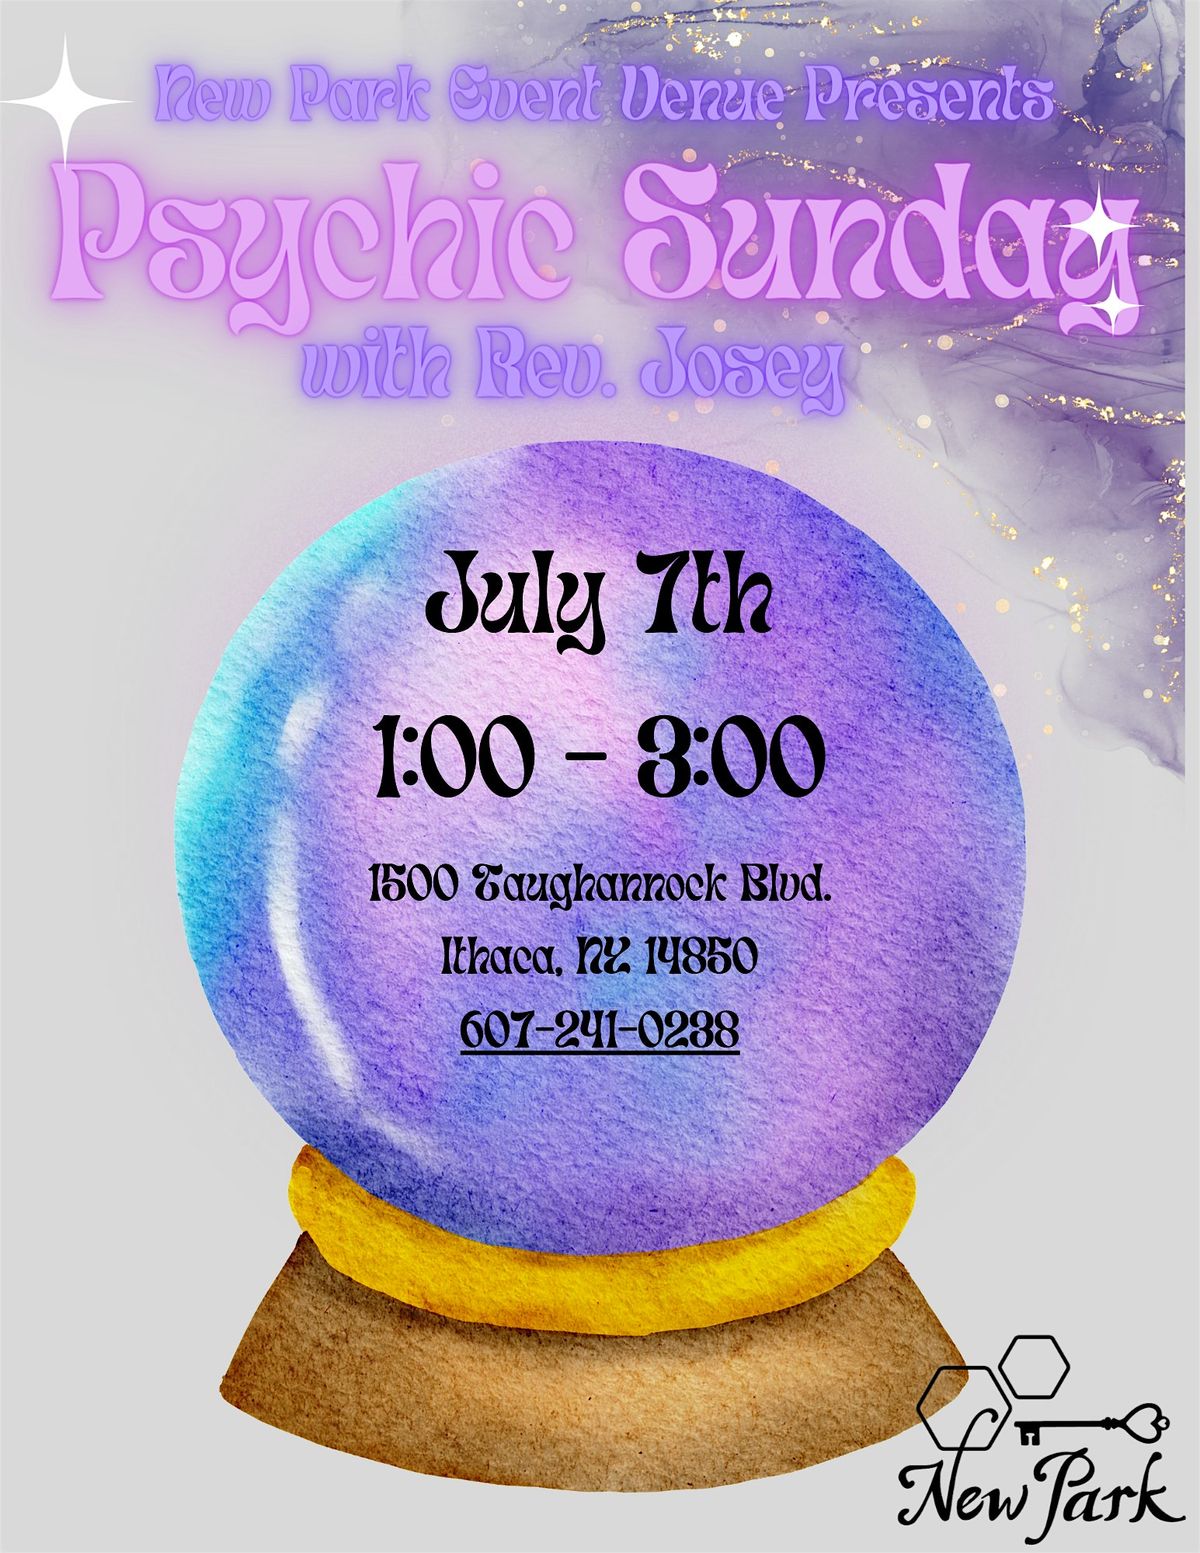 Psychic Sunday at New Park Event Venue